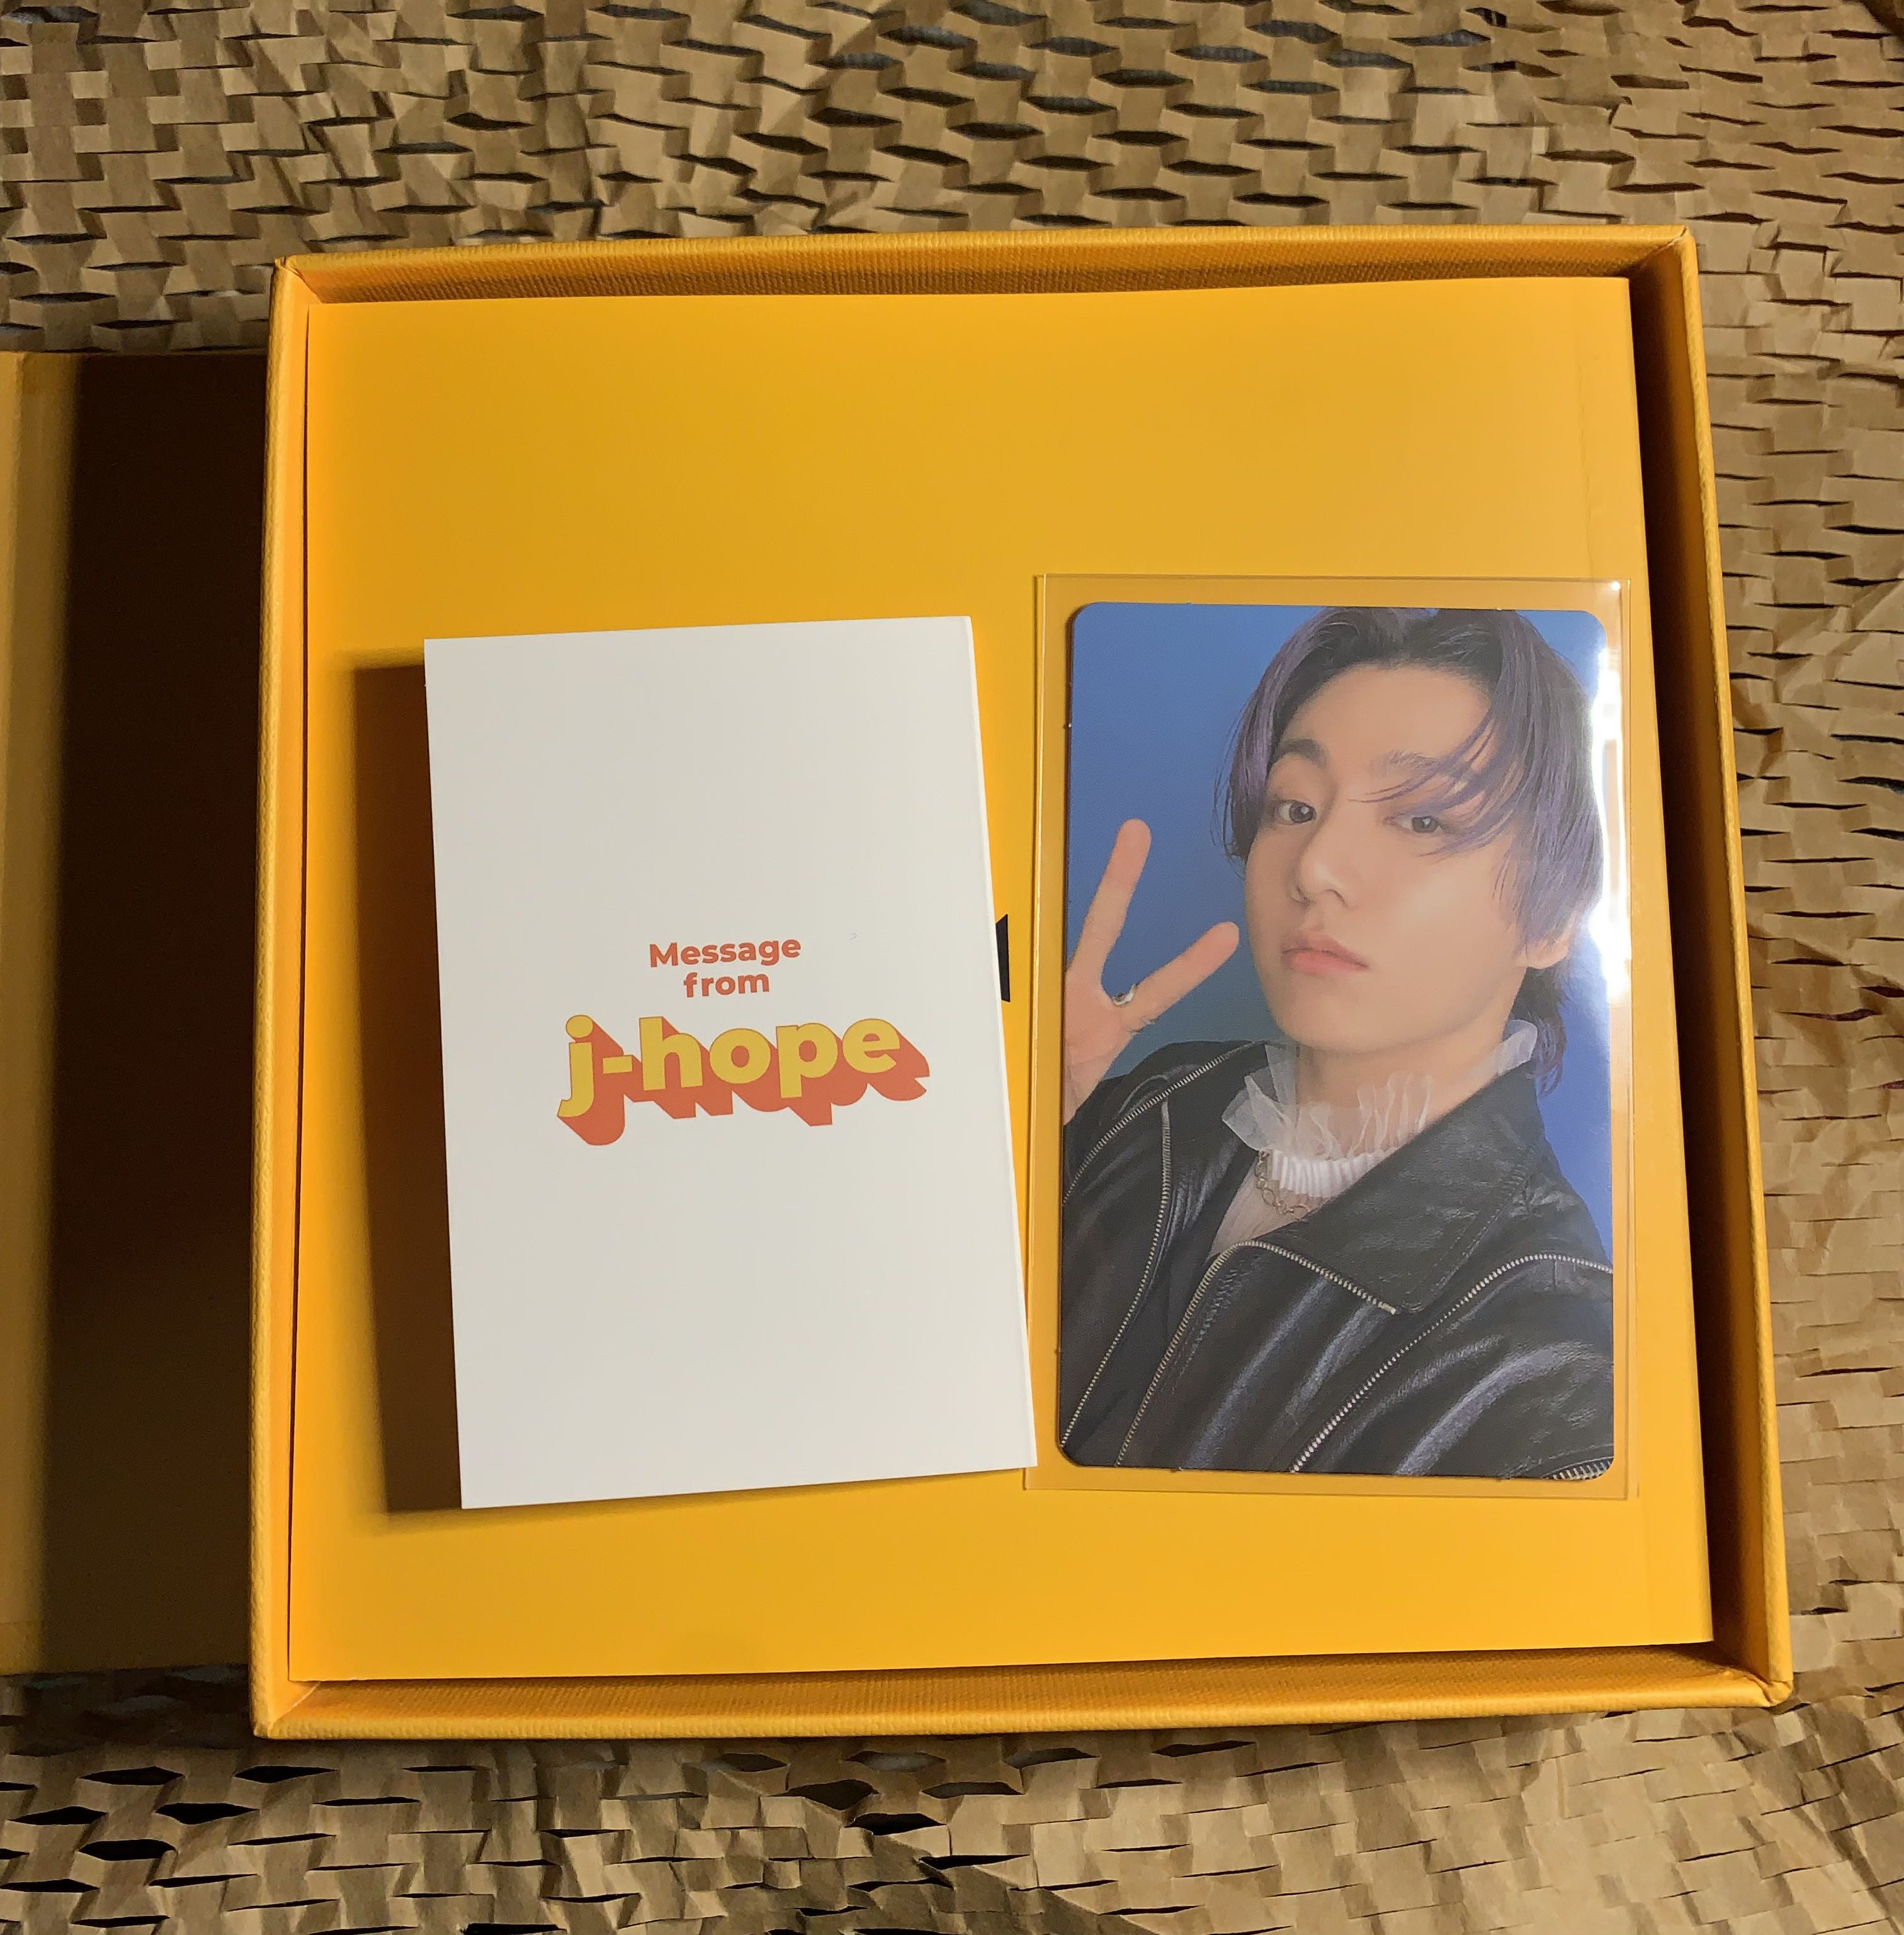 [ONHAND] Butter Album with Jungkook Cream PC and Hobi Msg Card, Hobbies ...